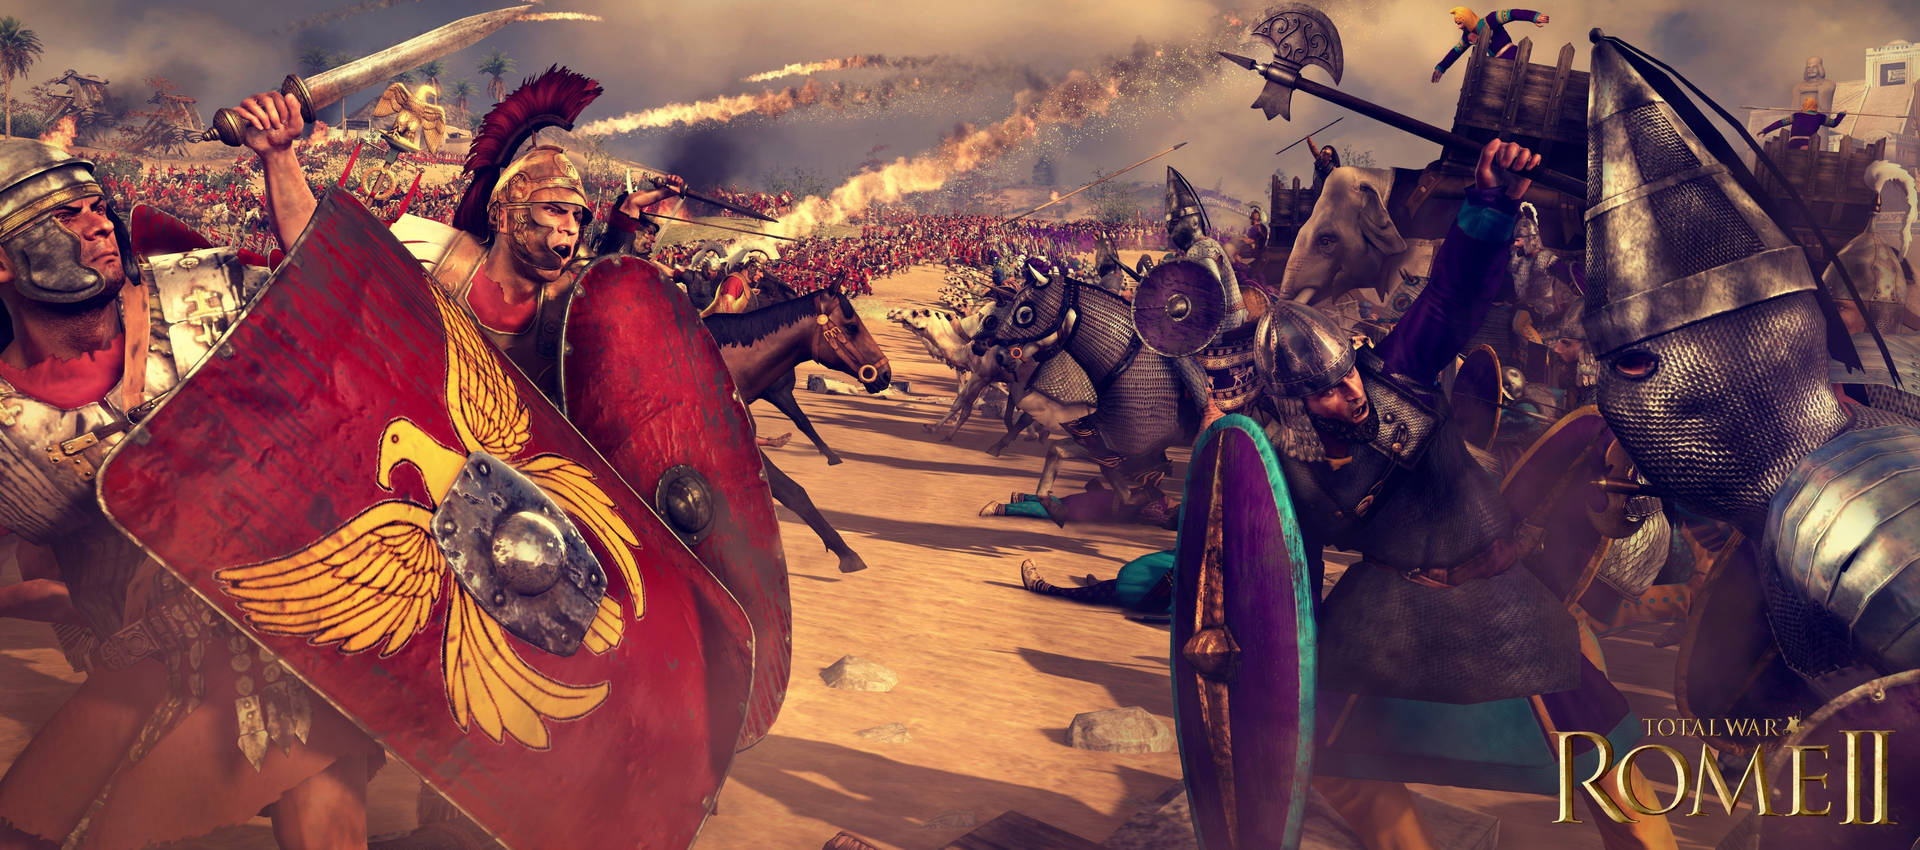 Total War Rome 2 Team Fight Background